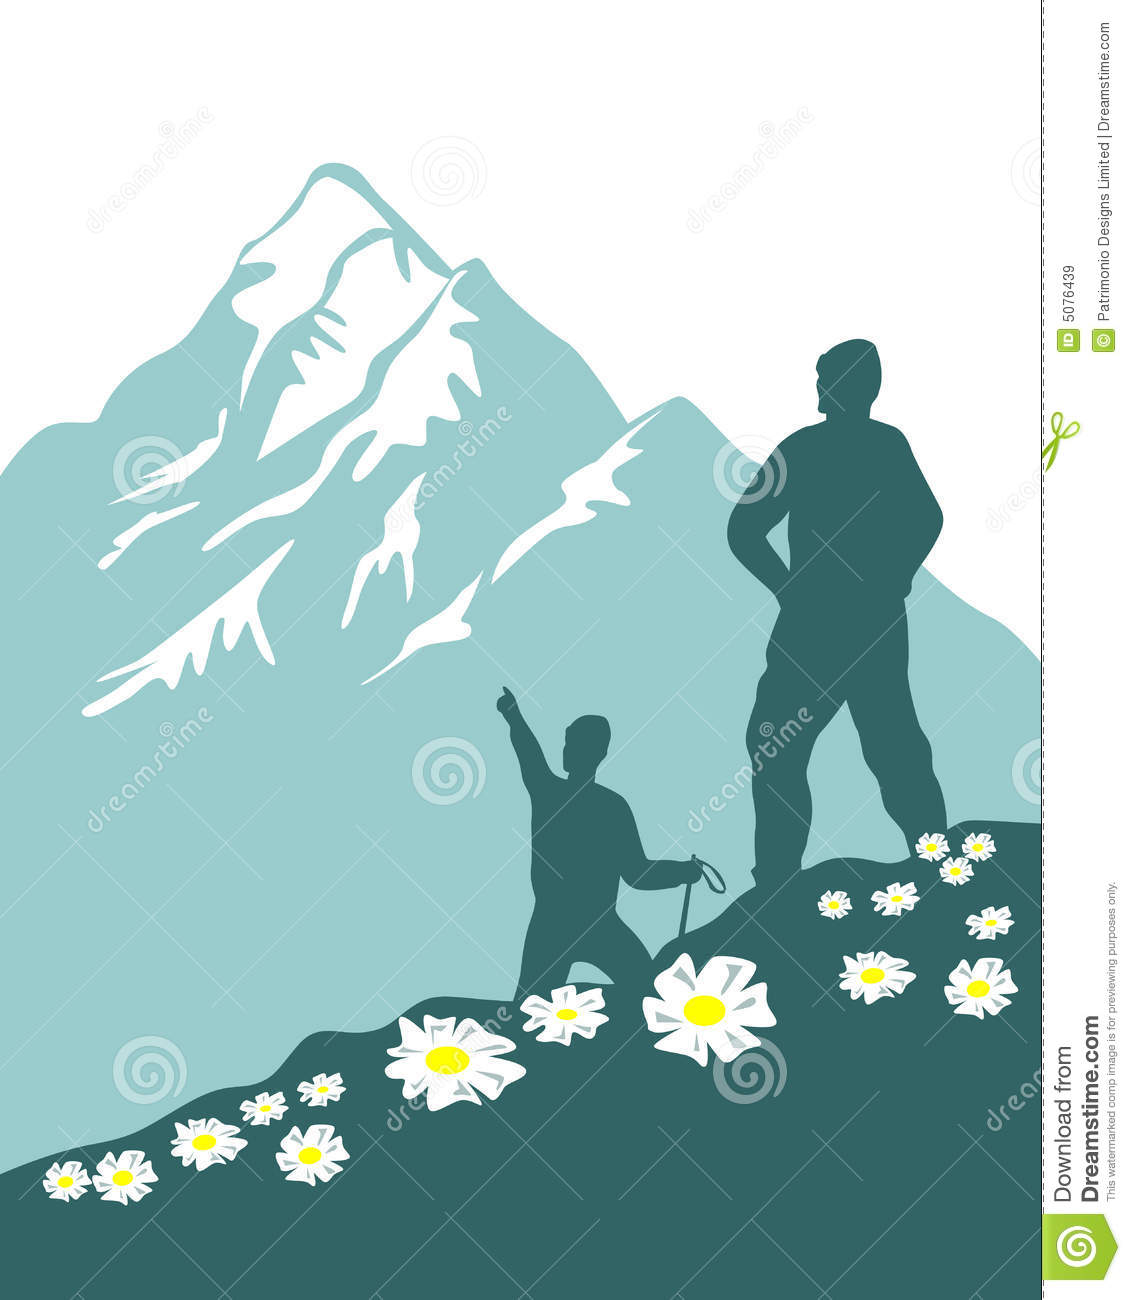 More Similar Stock Images Of   Mountain Climbers  